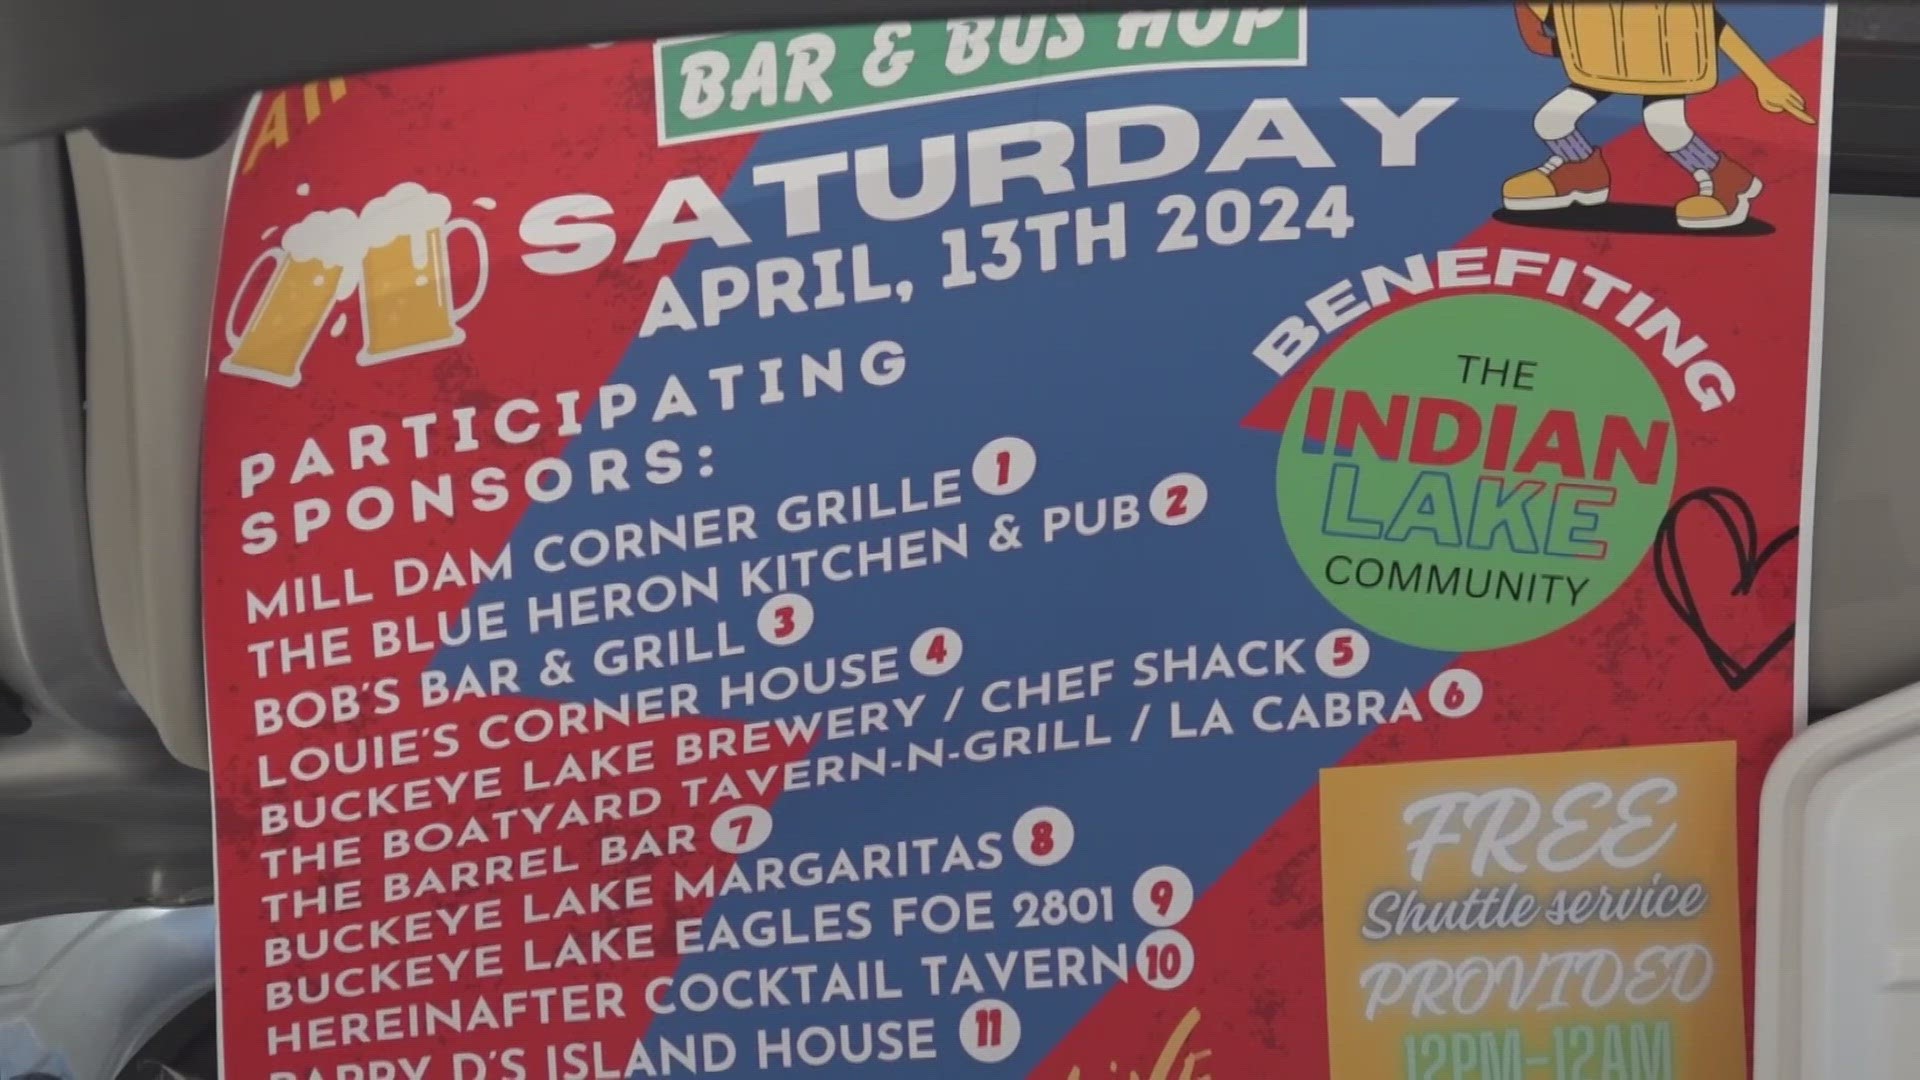 Eleven bars and restaurants in Buckeye Lake came together on Saturday to raise money for the victims of the Indian Lake tornado.